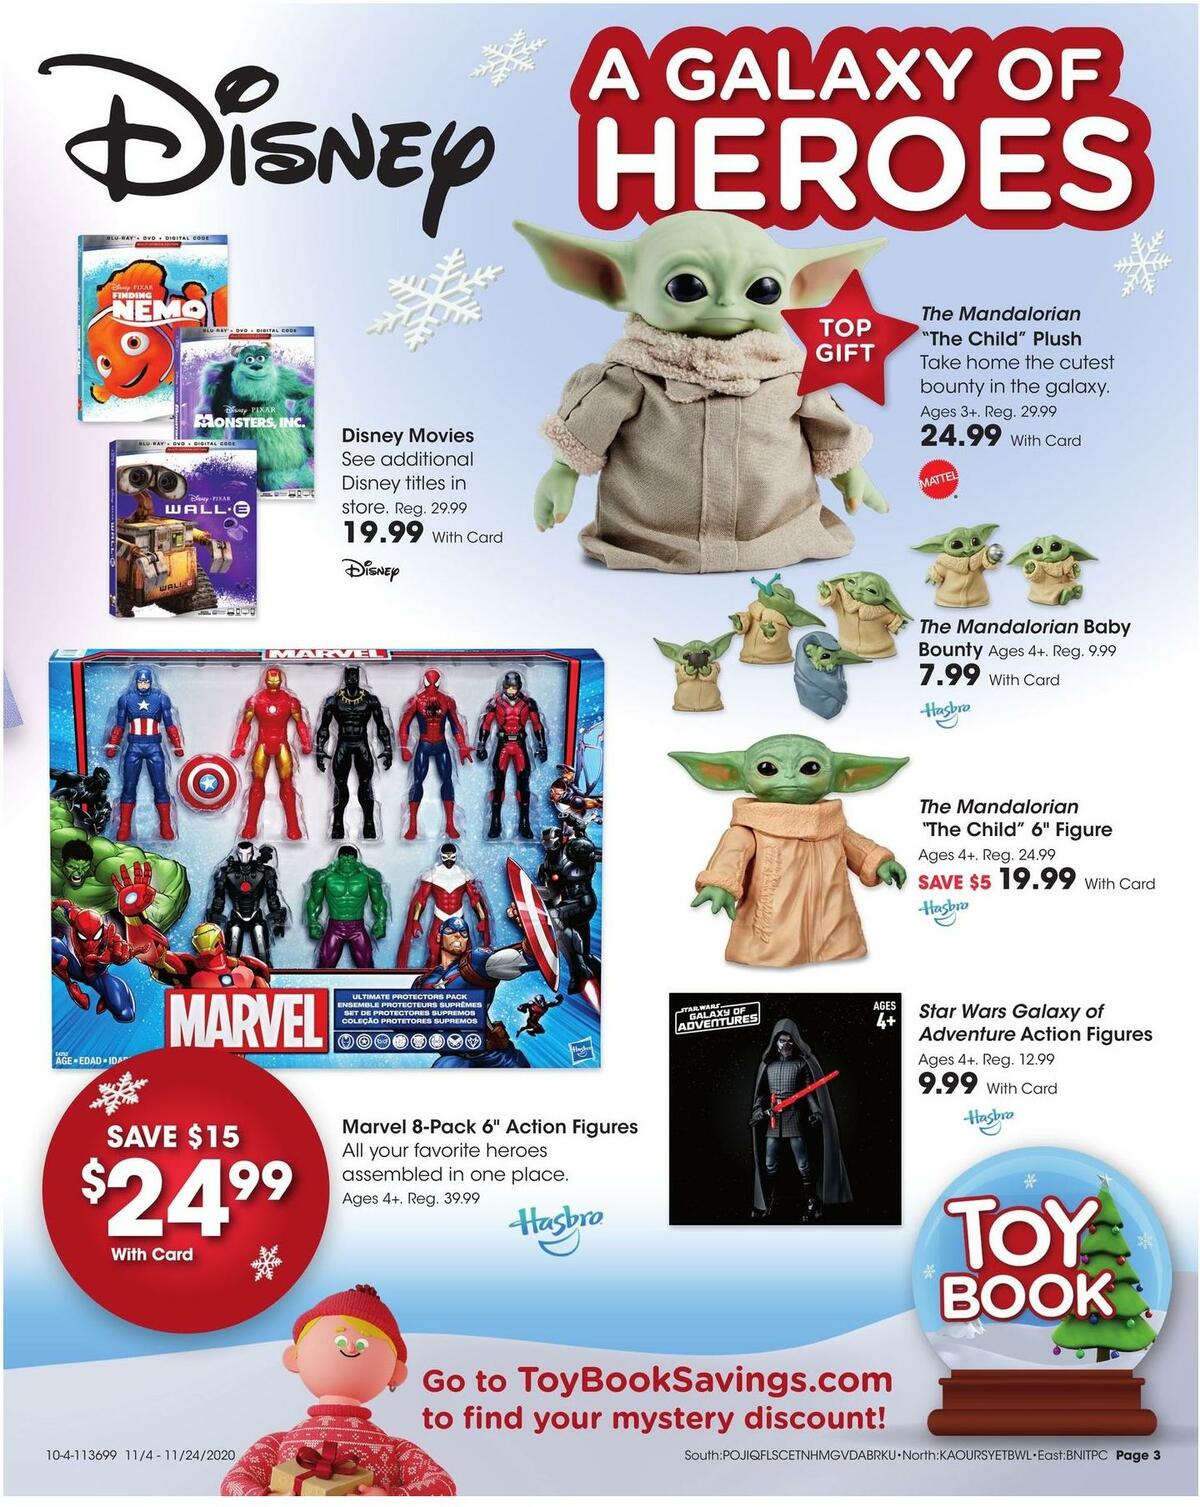 Fred Meyer Toy Wish Book Weekly Ad from November 4